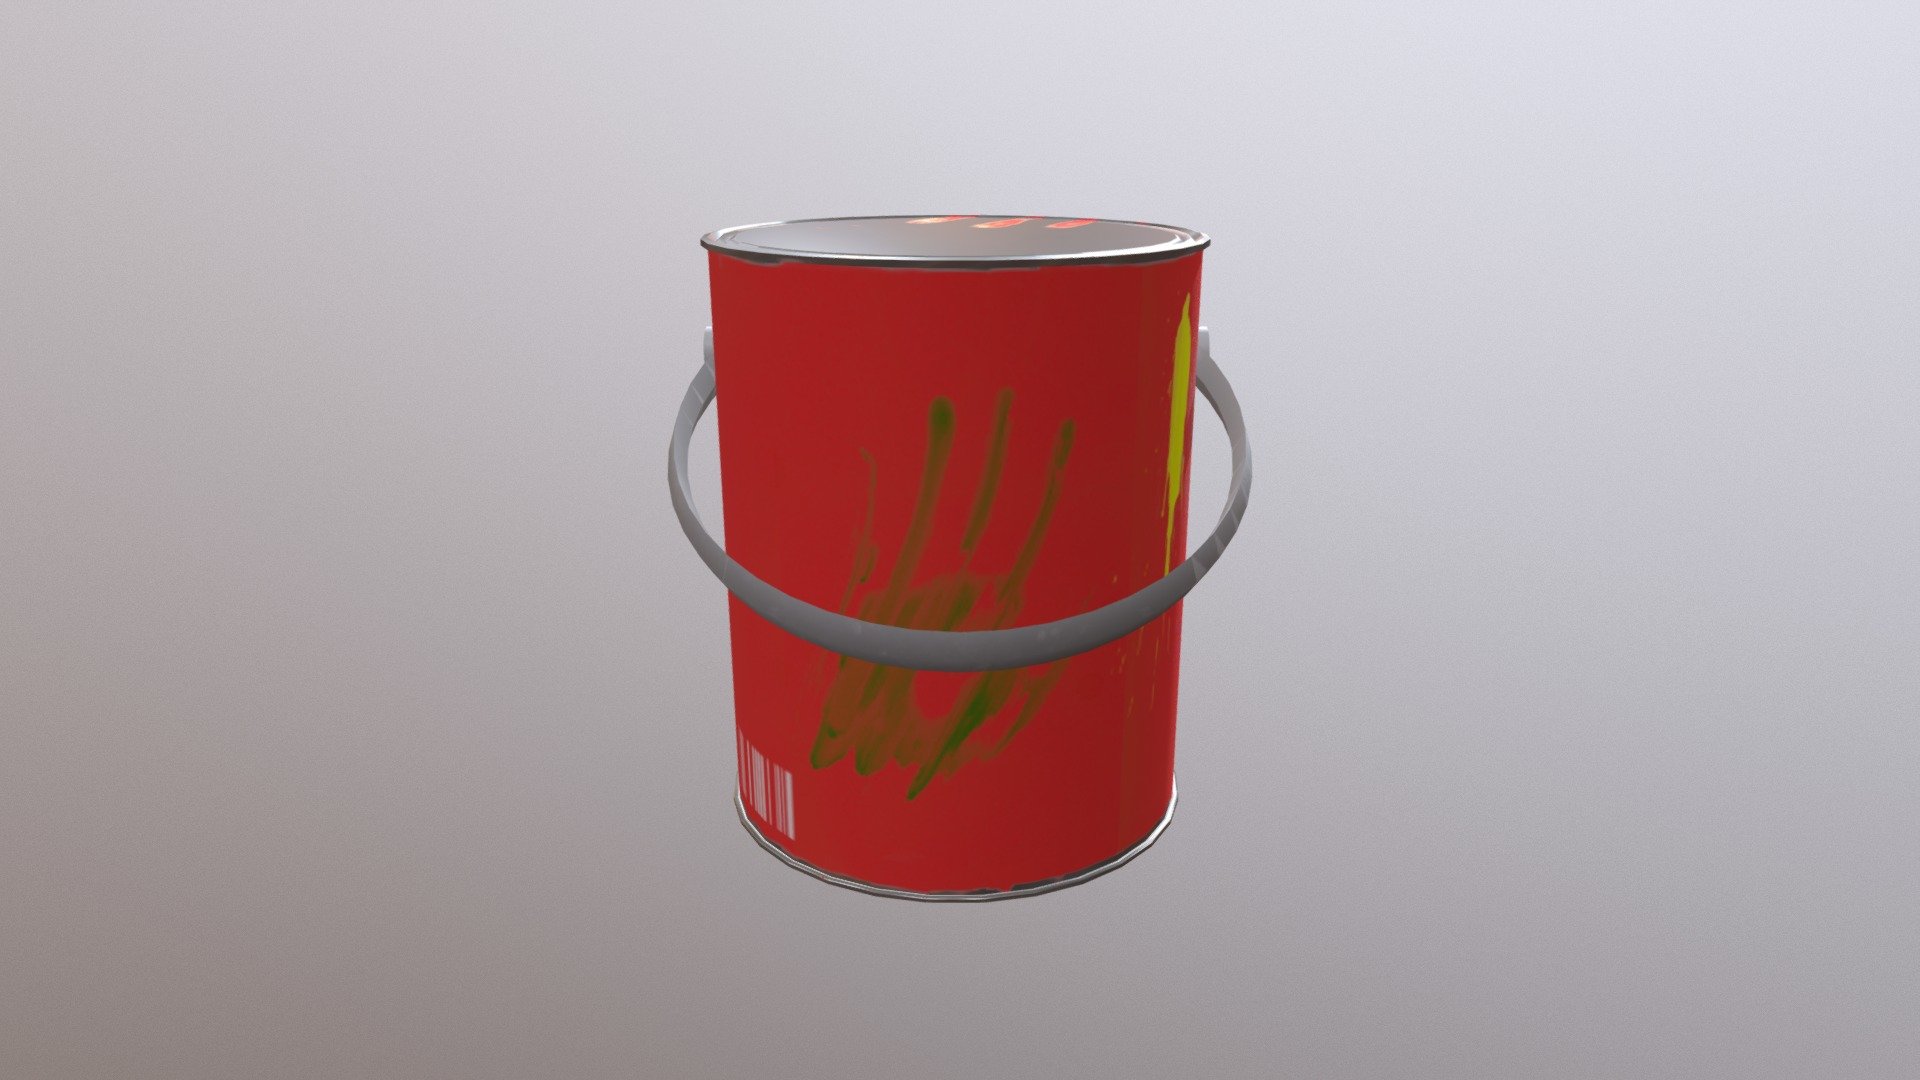 A tin of paint I created to act as complimenty asset for my main 3D Modelling University project, need to add a few more complimentary assets such as screwdrivers, hammers, paint buckets etc. when I add it too my final project. Modelled in Maya, textured and rendered in Substance Painter. As a student any tips, criticism and comments on improvement would be really appreciated.
For some reason I couldnt get the Substance Painter to let me import a JPEG label onto the model, if anyone has a soloution or a link to a tutorial that would address this issue please comment. Thanks - Tin of Paint - 3D model by iamFolegnani 3d model